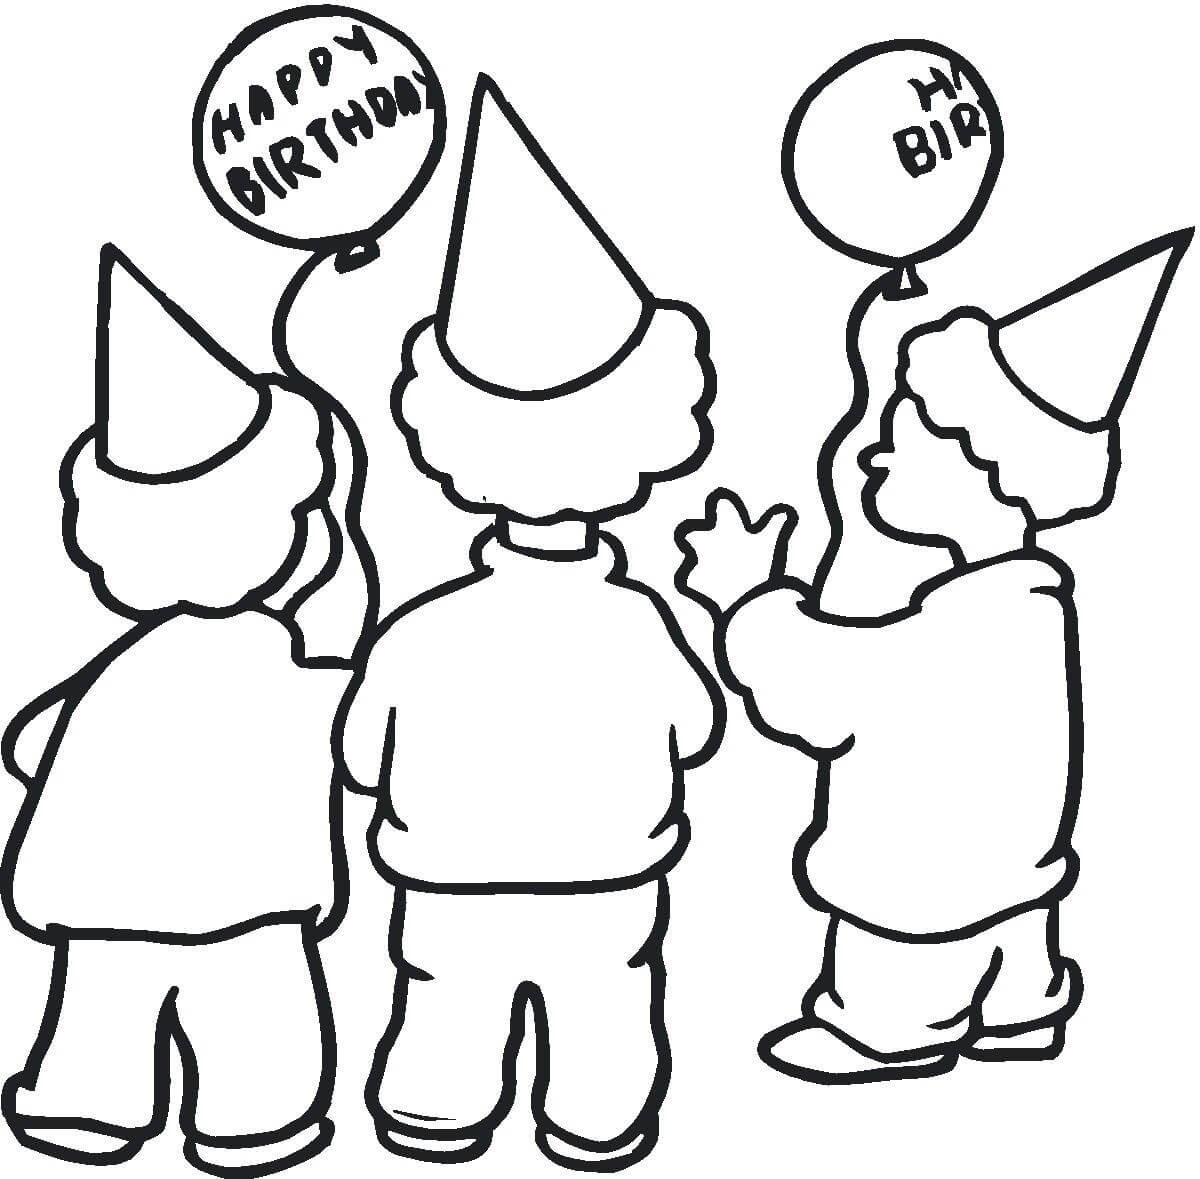 Boys In Party Hats Coloring Page